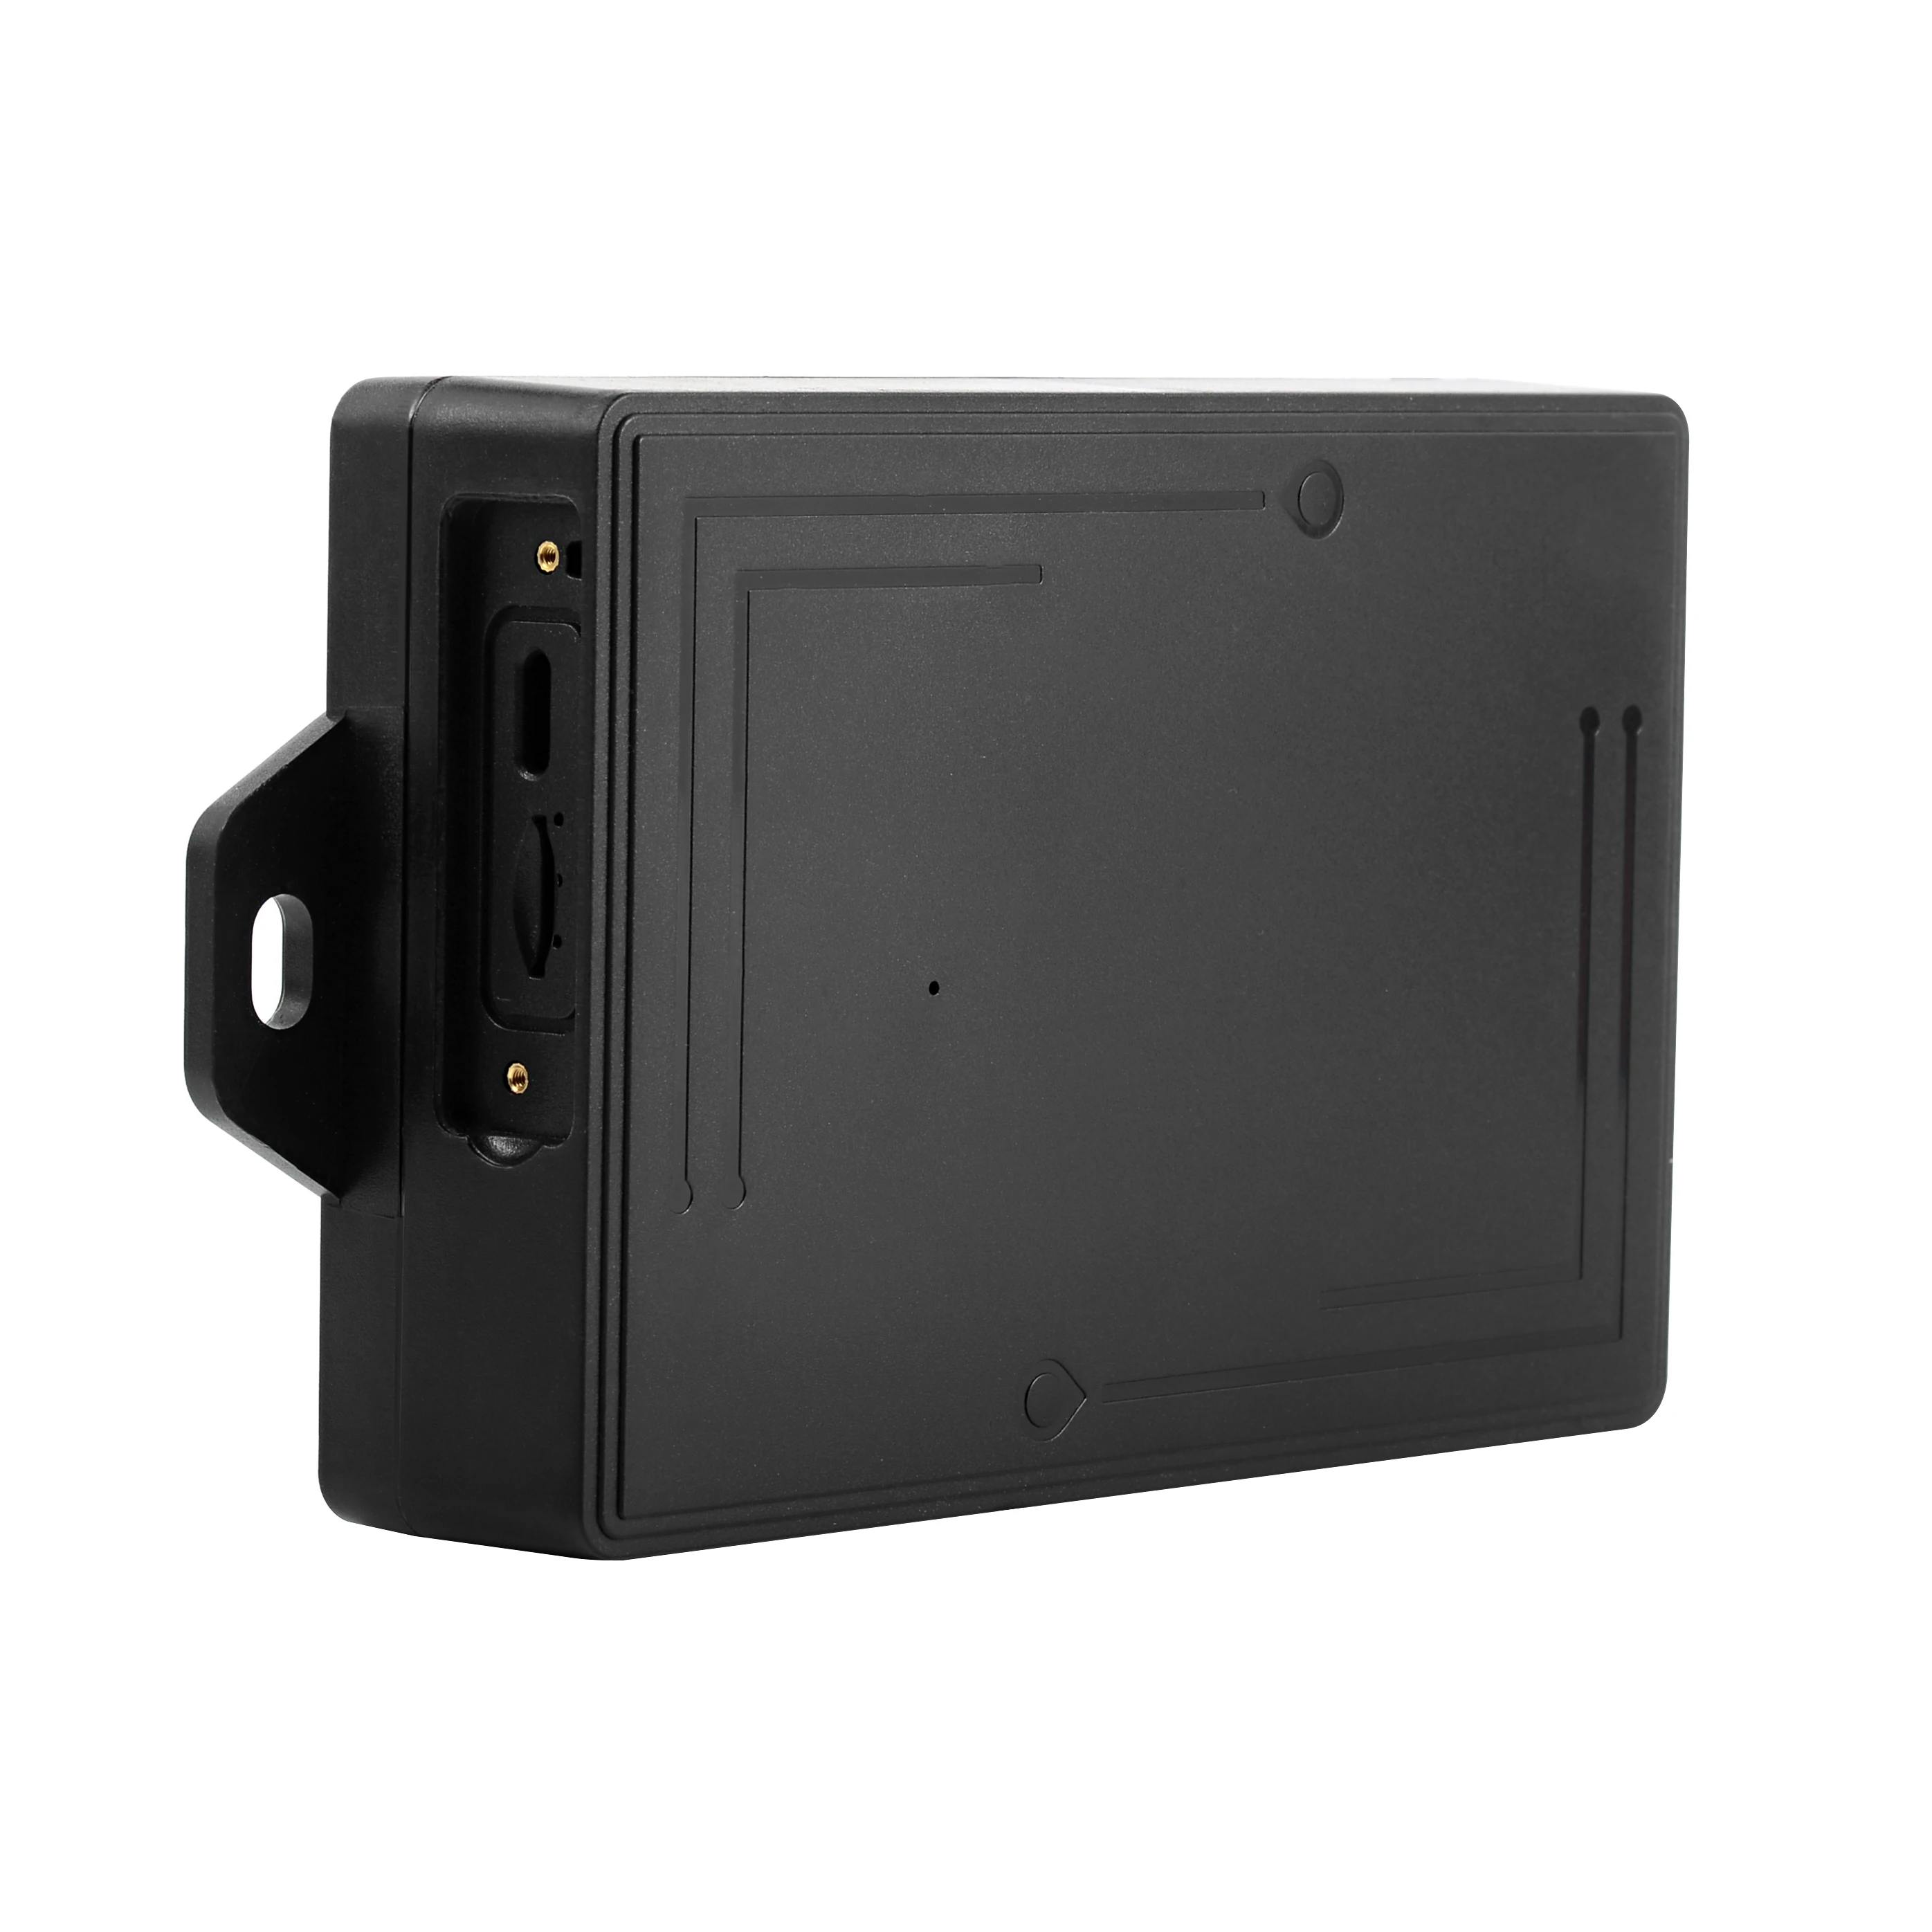 Cantrack's GF60L is integrated with GpsGate's software